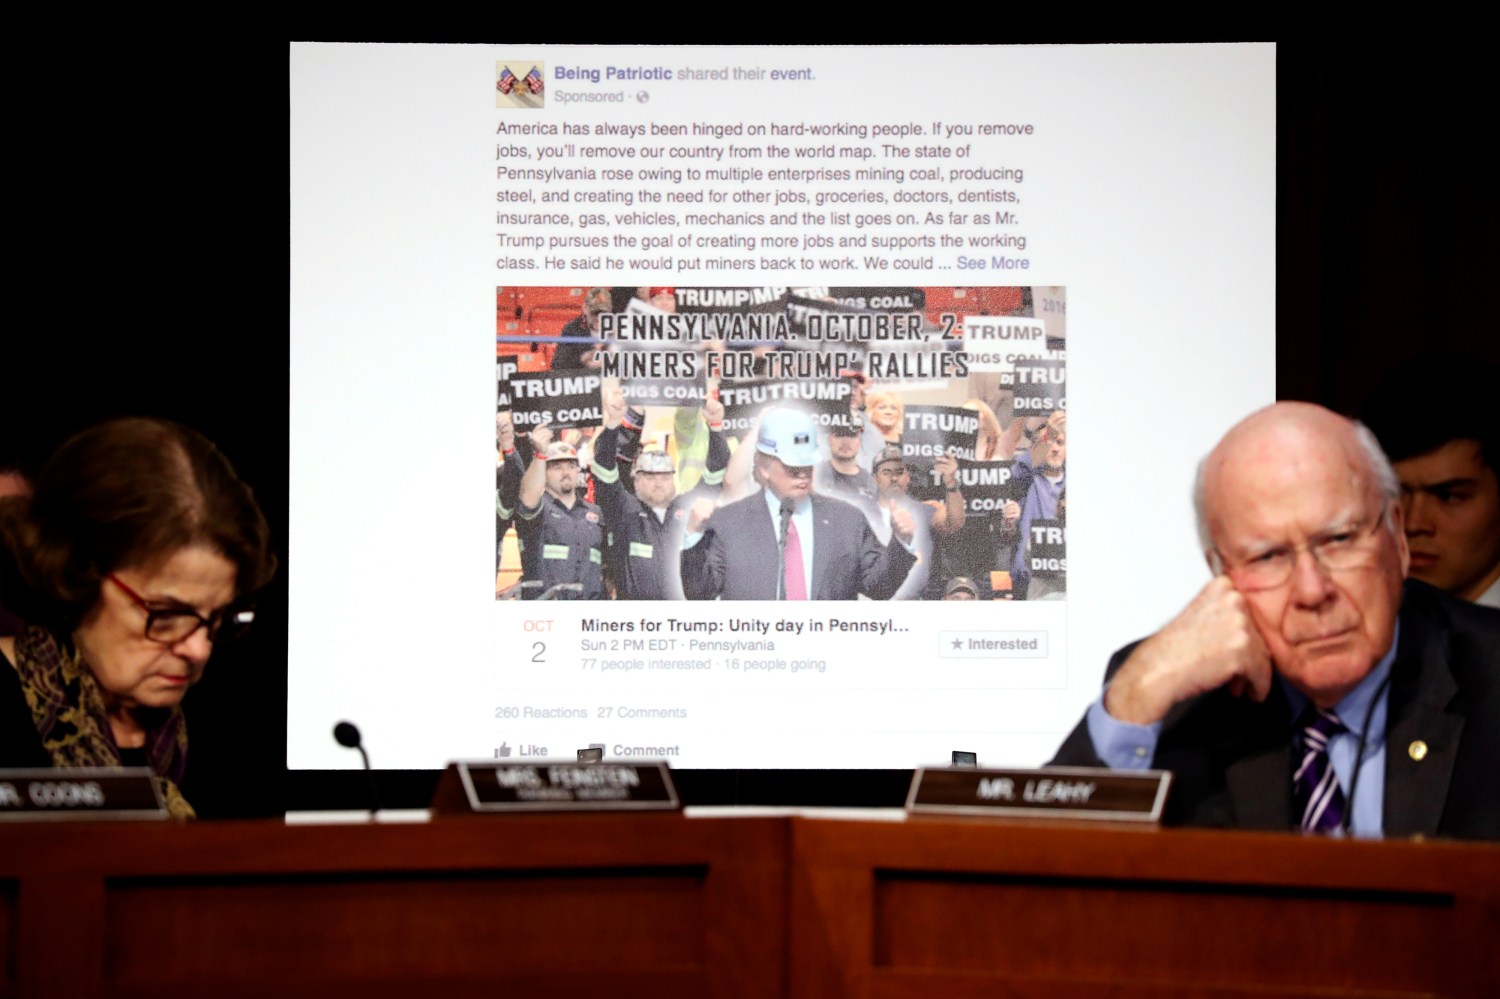 U.S. Senator Dianne Feinstein (D-CA) (L) and Senator Pat Leahy (D-VT) show a fake social media post for a non-existent "Miners for Trump" rally as representatives of Twitter, Facebook and Google testify before a Senate Judiciary Crime and Terrorism Subcommittee hearing on how Russia allegedly used their services to try to sway the 2016 U.S. elections, on Capitol Hill in Washington, U.S. October 31, 2017. REUTERS/Jonathan Ernst